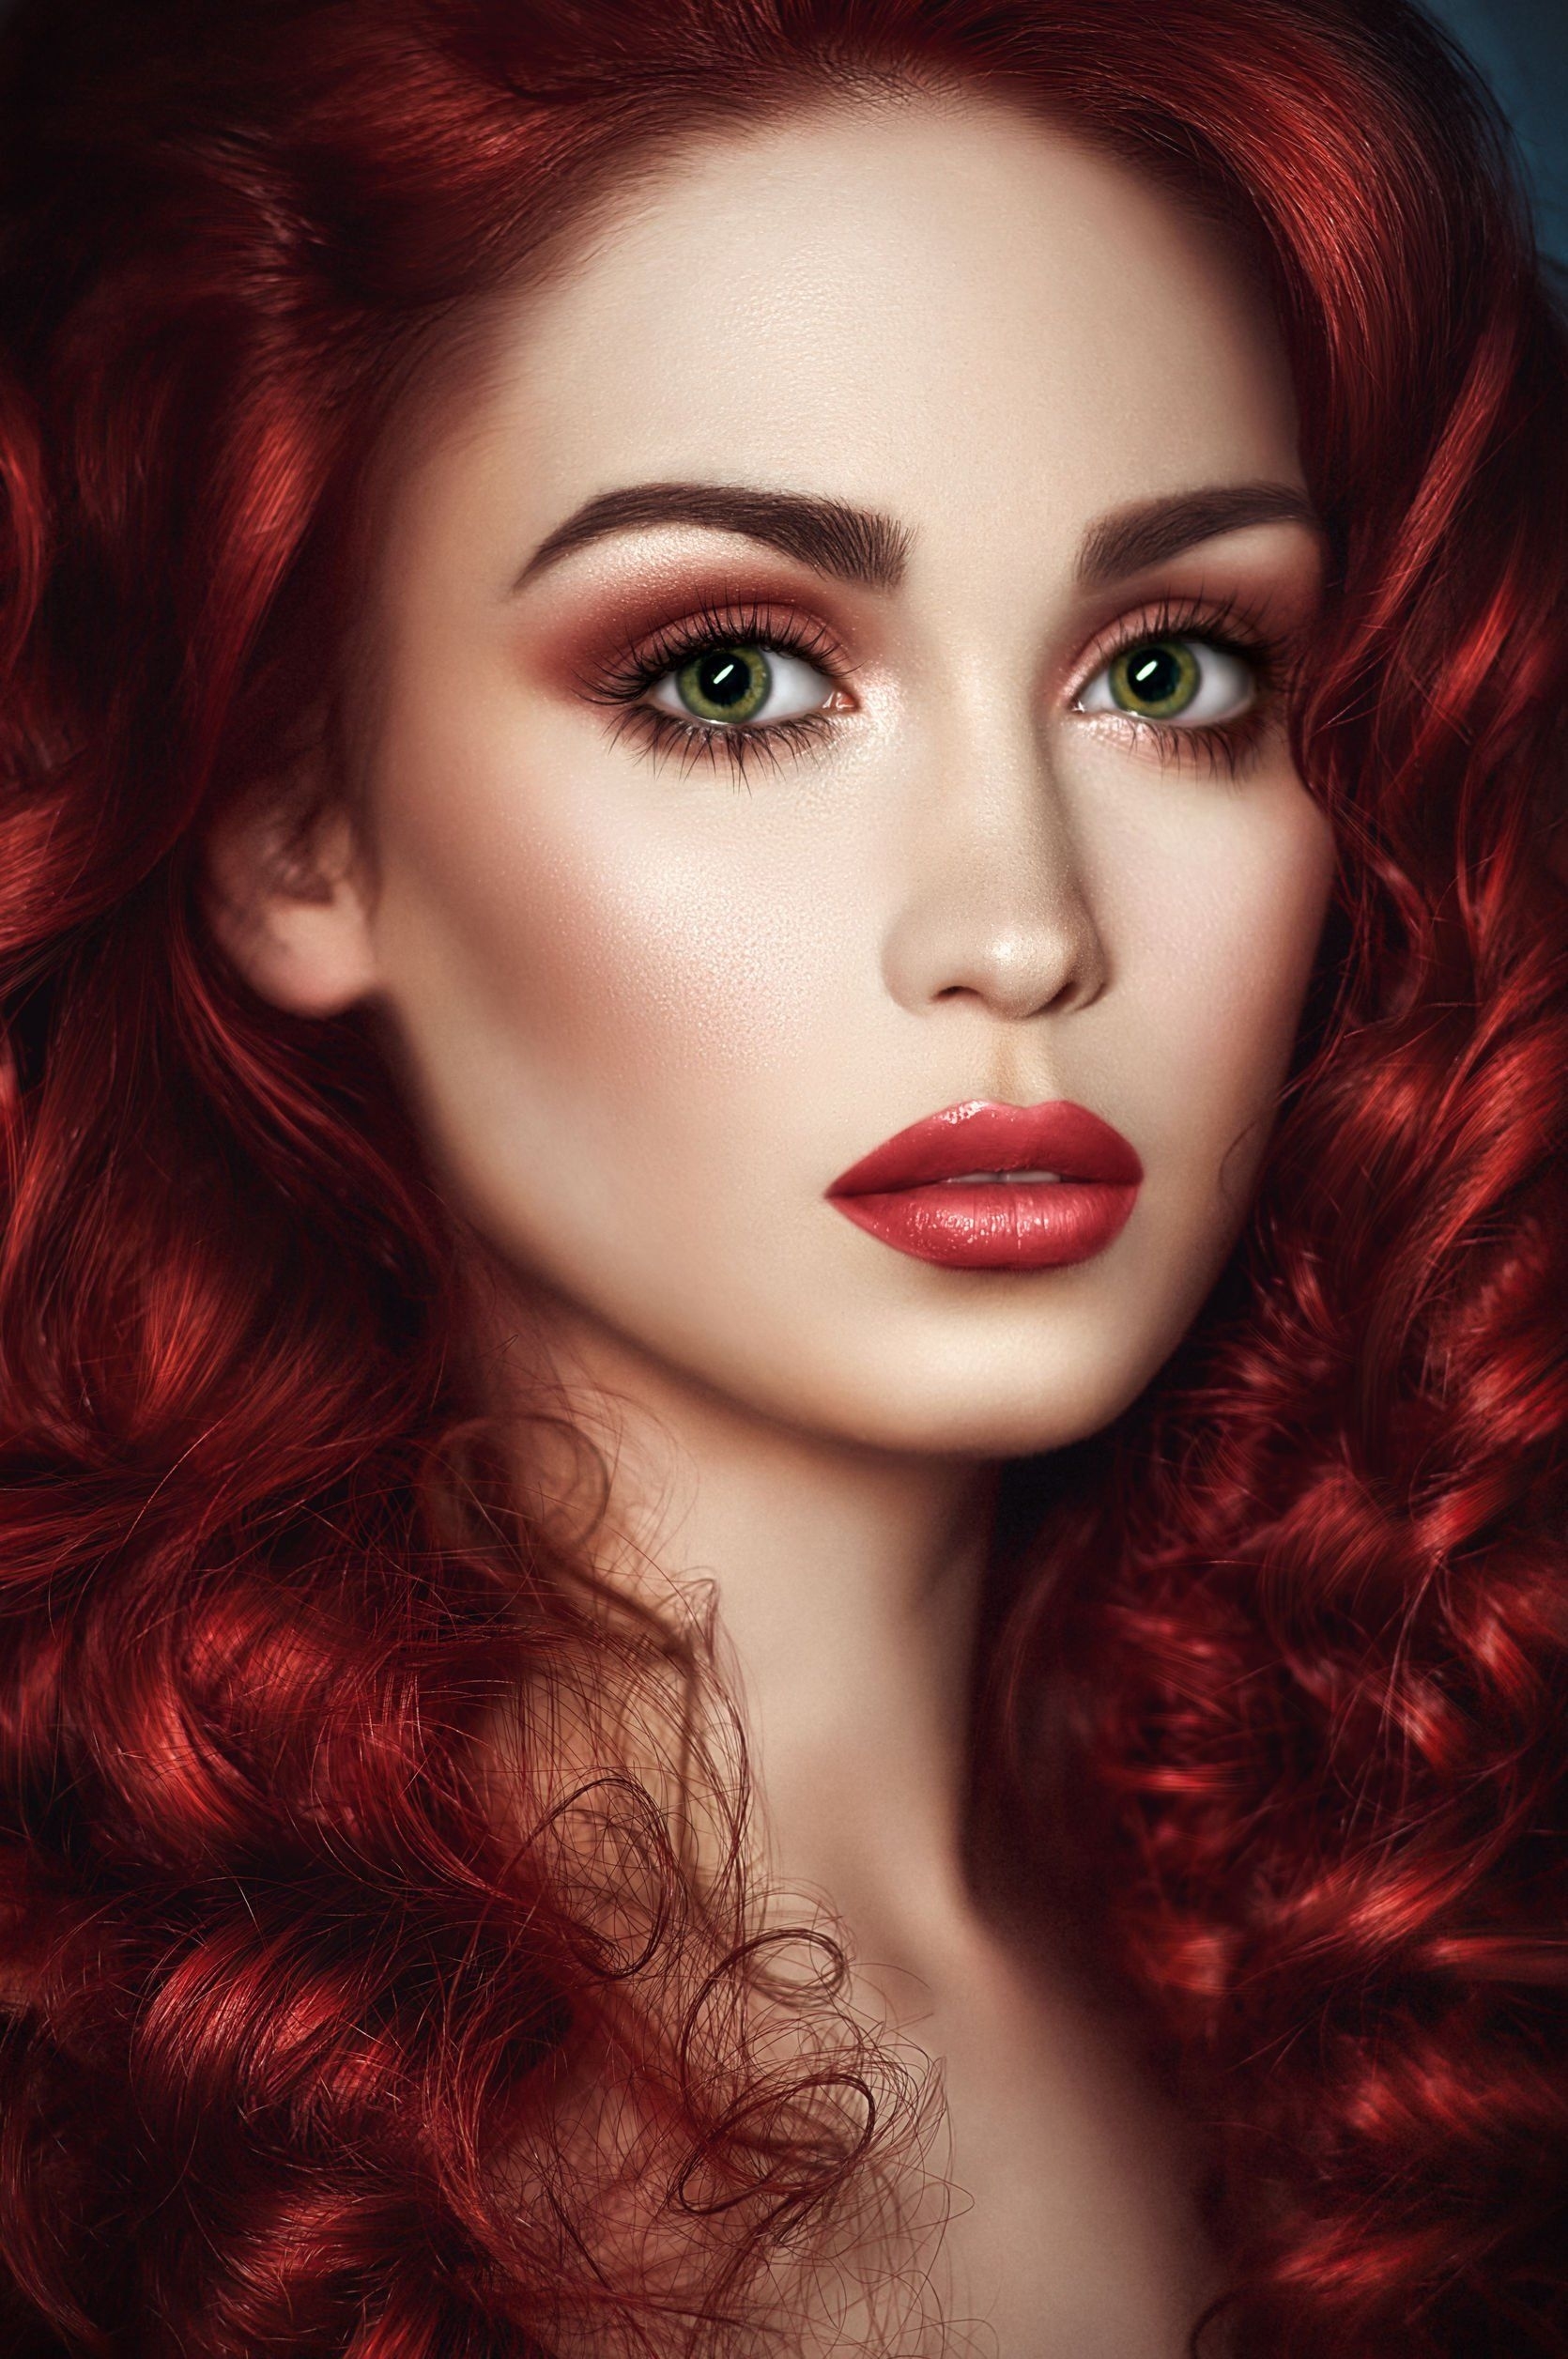 What's The Best Hair Color For Green Eyes? | Juvetress with regard to Best Makeup Colors For Redheads With Green Eyes